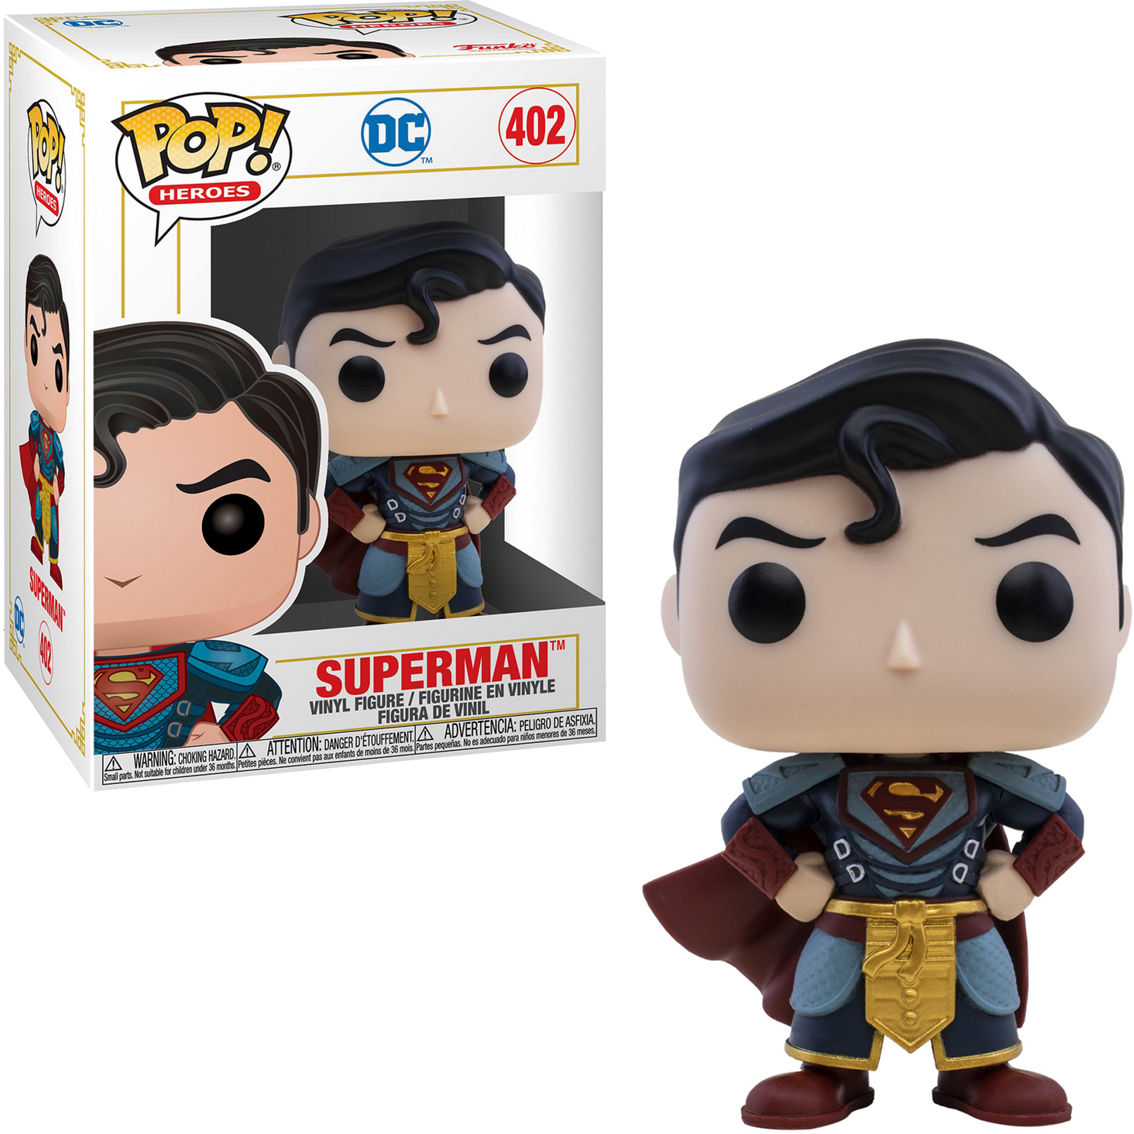 Funko POP! DC Heroes Imperial Palace Collector's Set - Image 5 of 7